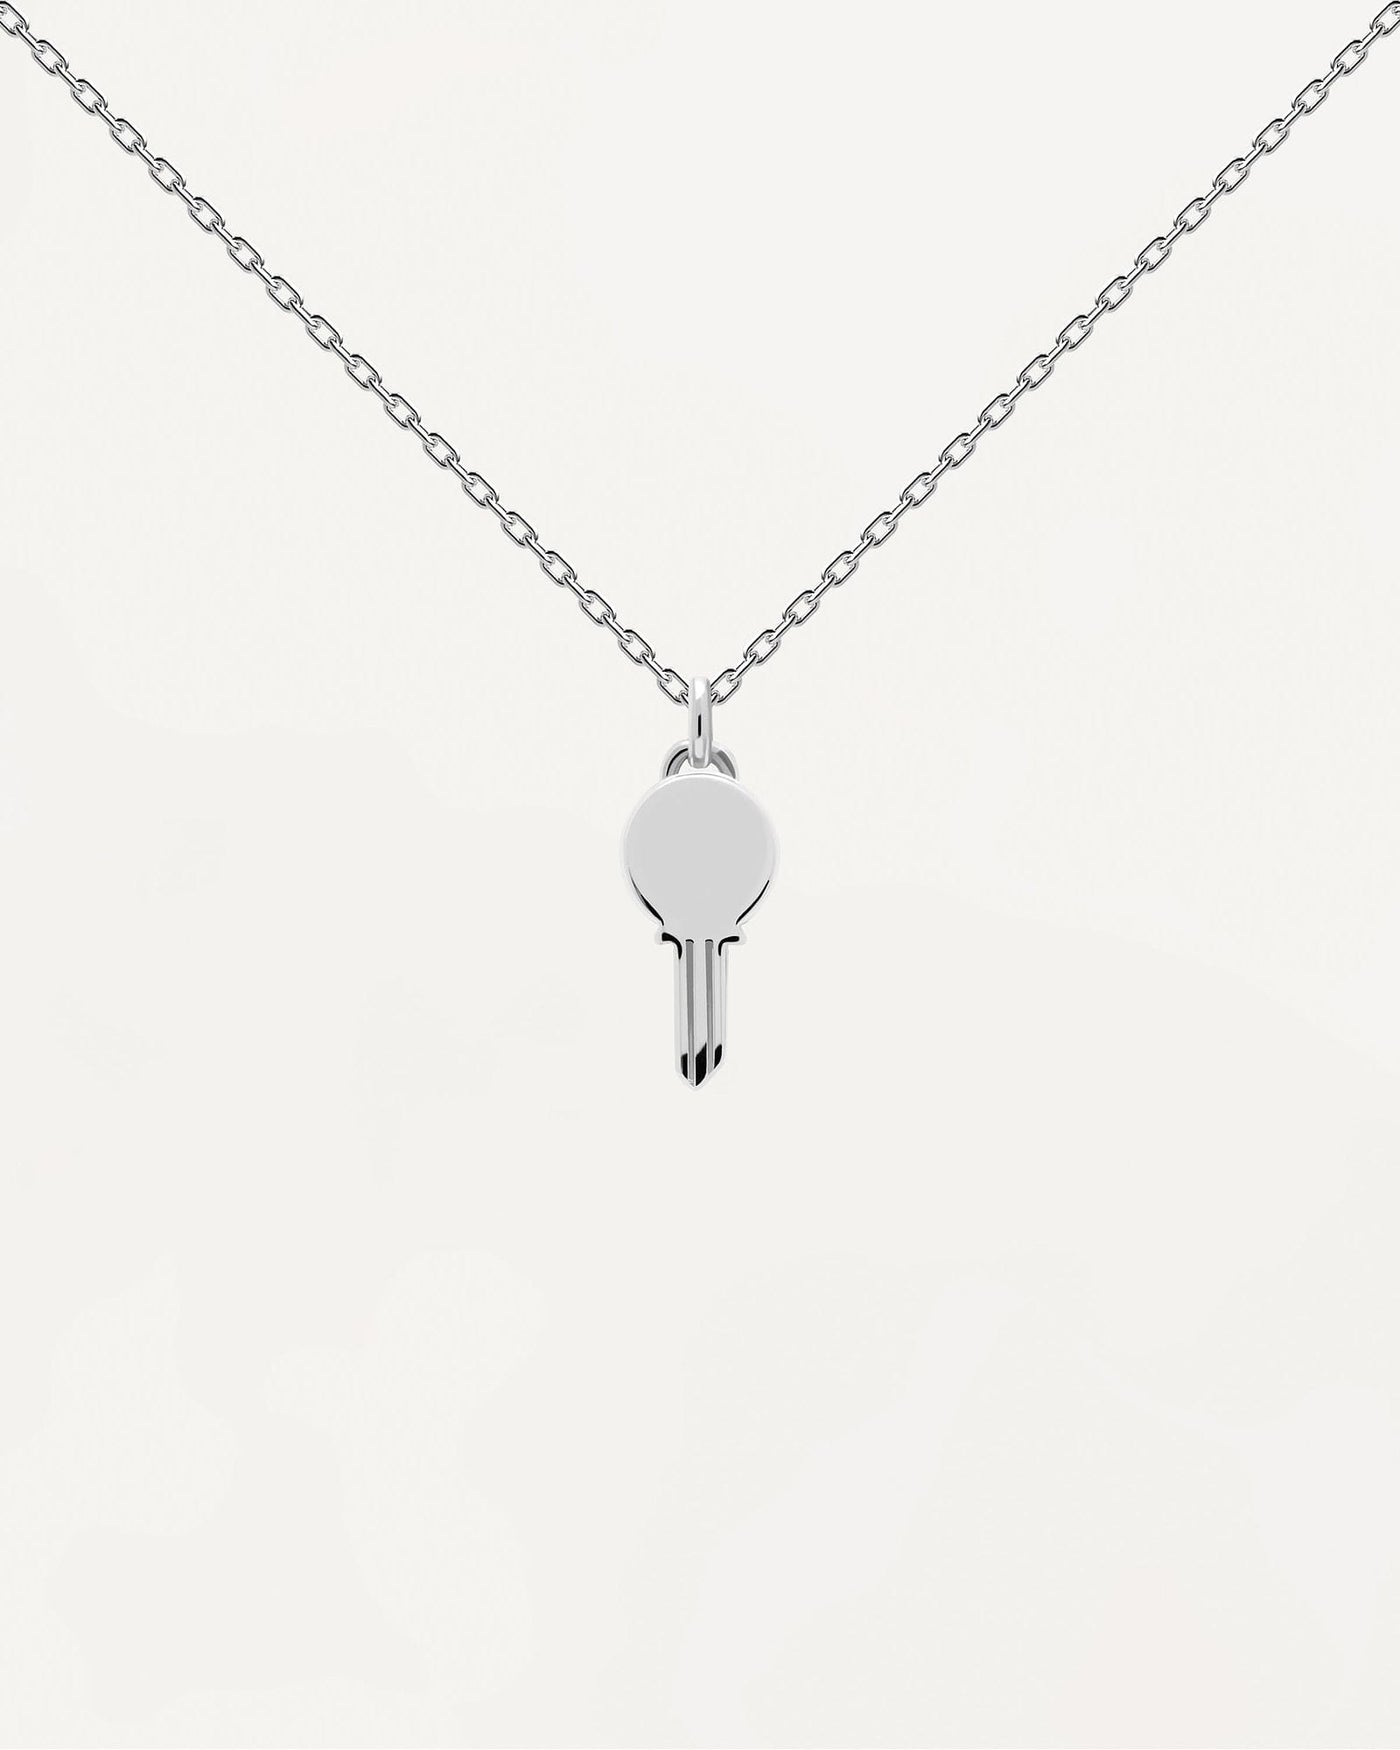 2024 Selection | Eternum Silver Necklace. Sterling silver necklace with personalized key pendant to engrave. Get the latest arrival from PDPAOLA. Place your order safely and get this Best Seller. Free Shipping.